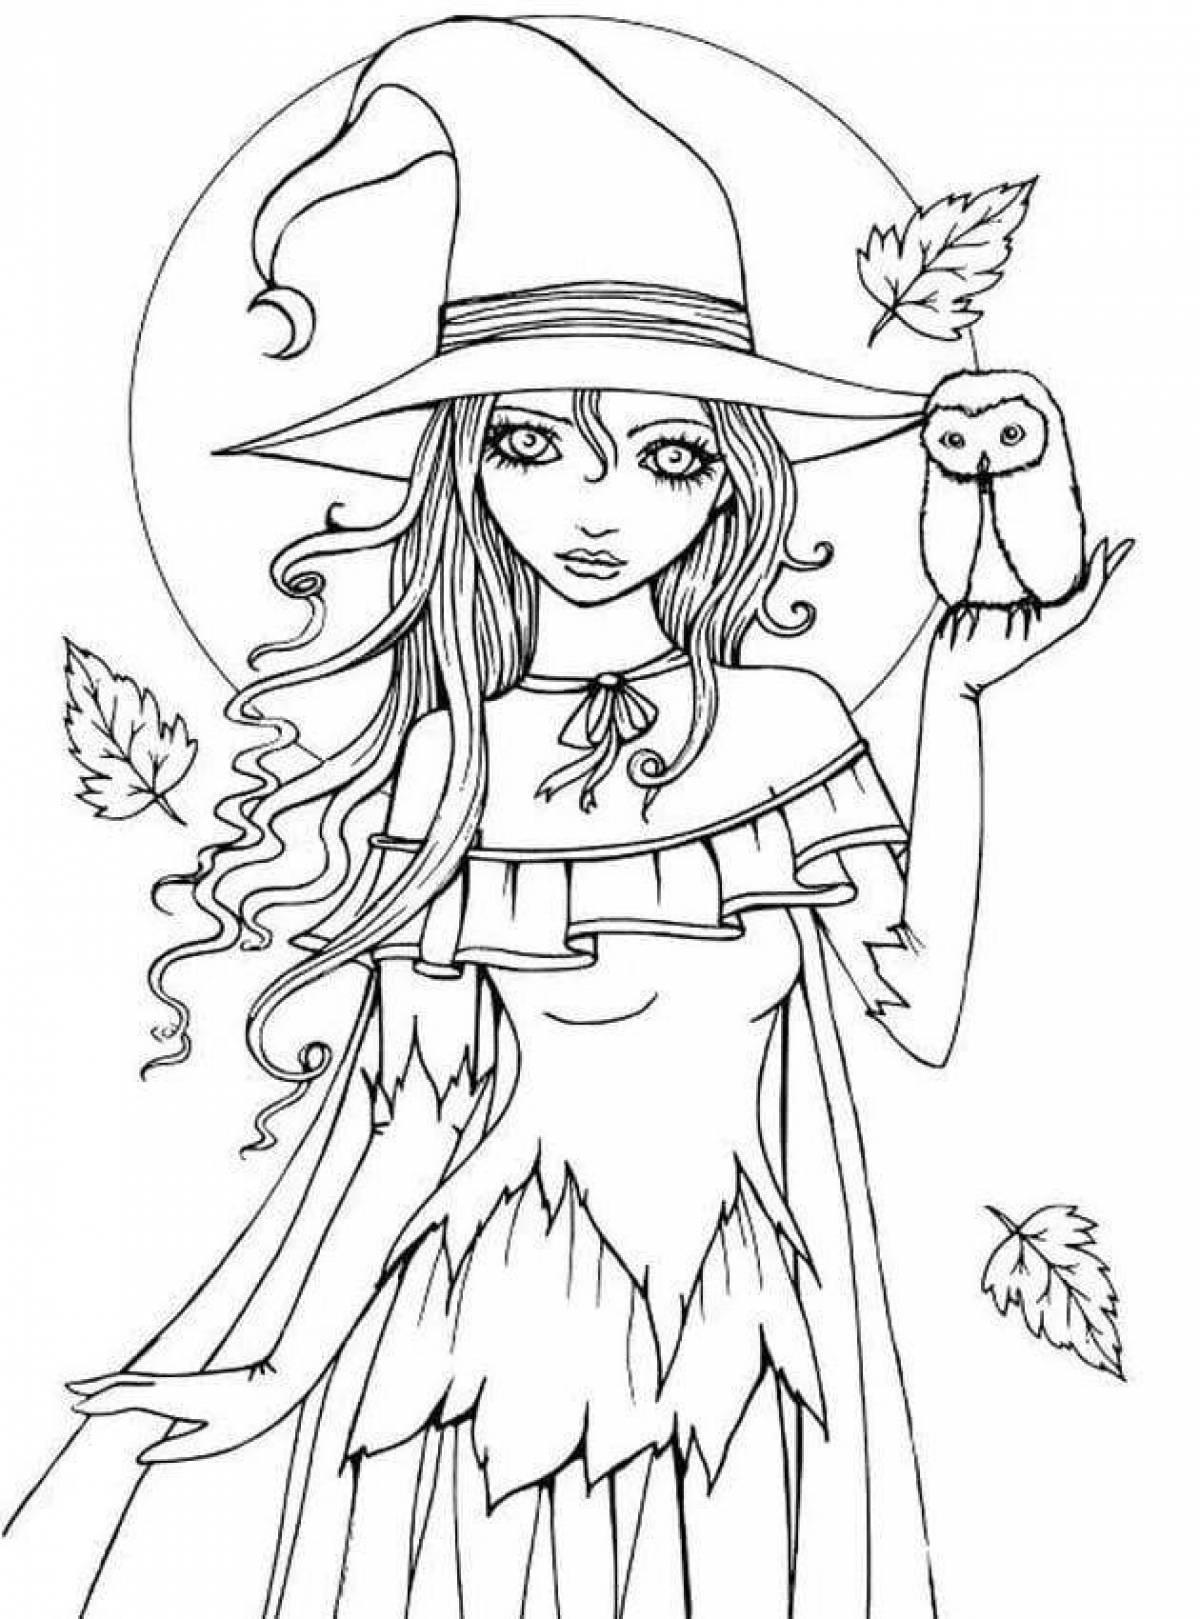 Witch stylish coloring book